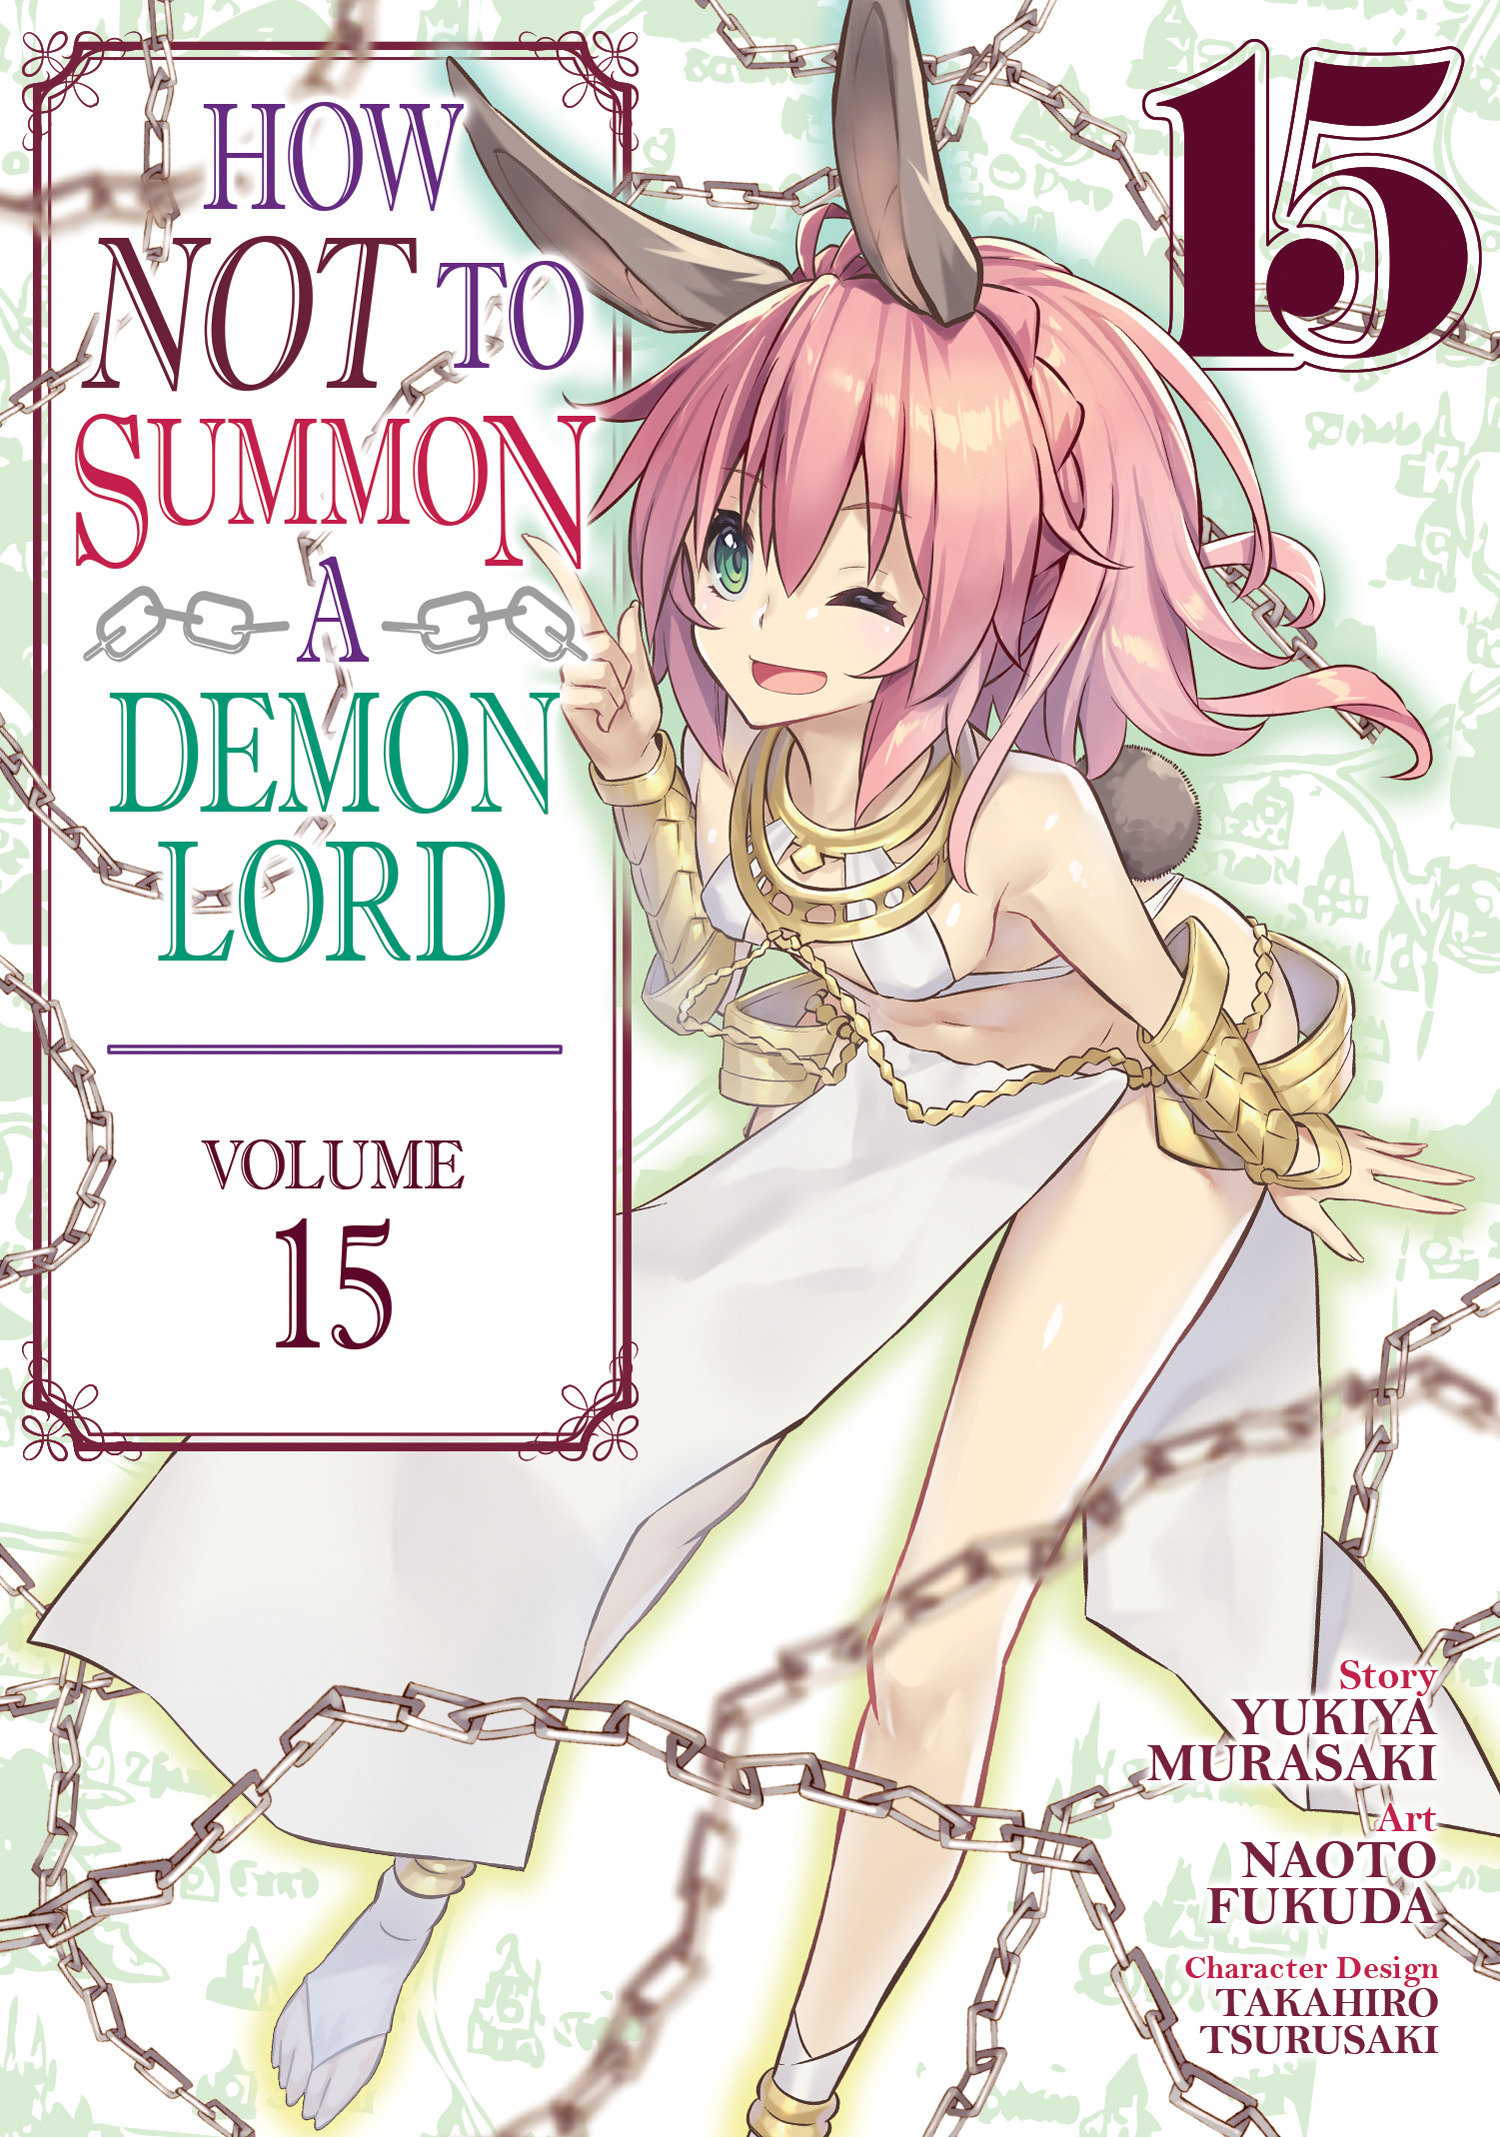 How not to Summon a Demon Lord Manga Volume 15 (Mature)